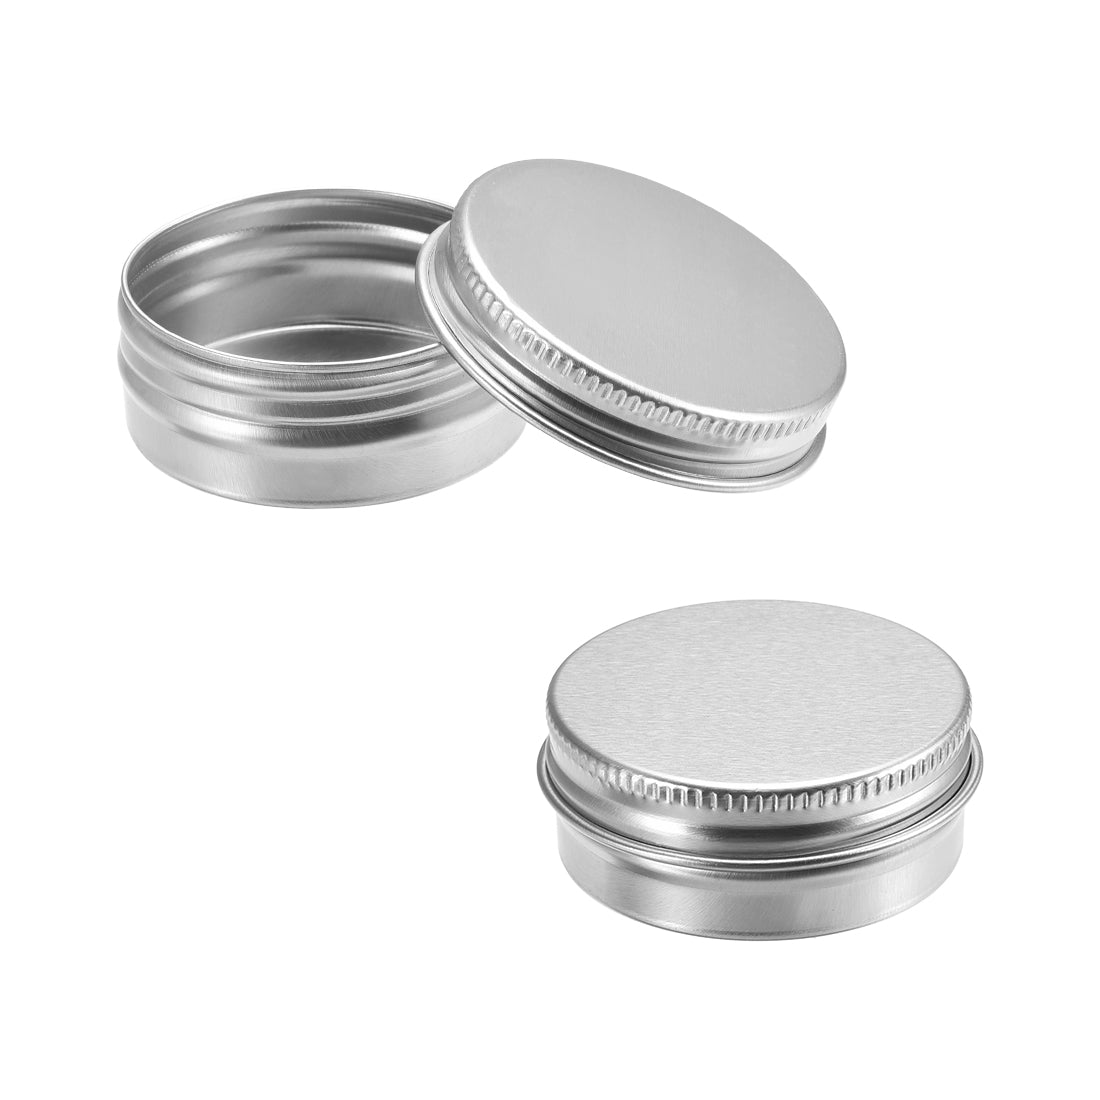 uxcell Uxcell 1/2 oz Round Aluminum Cans Tin Can Screw Top Metal Lid Containers 15ml, 12pcs